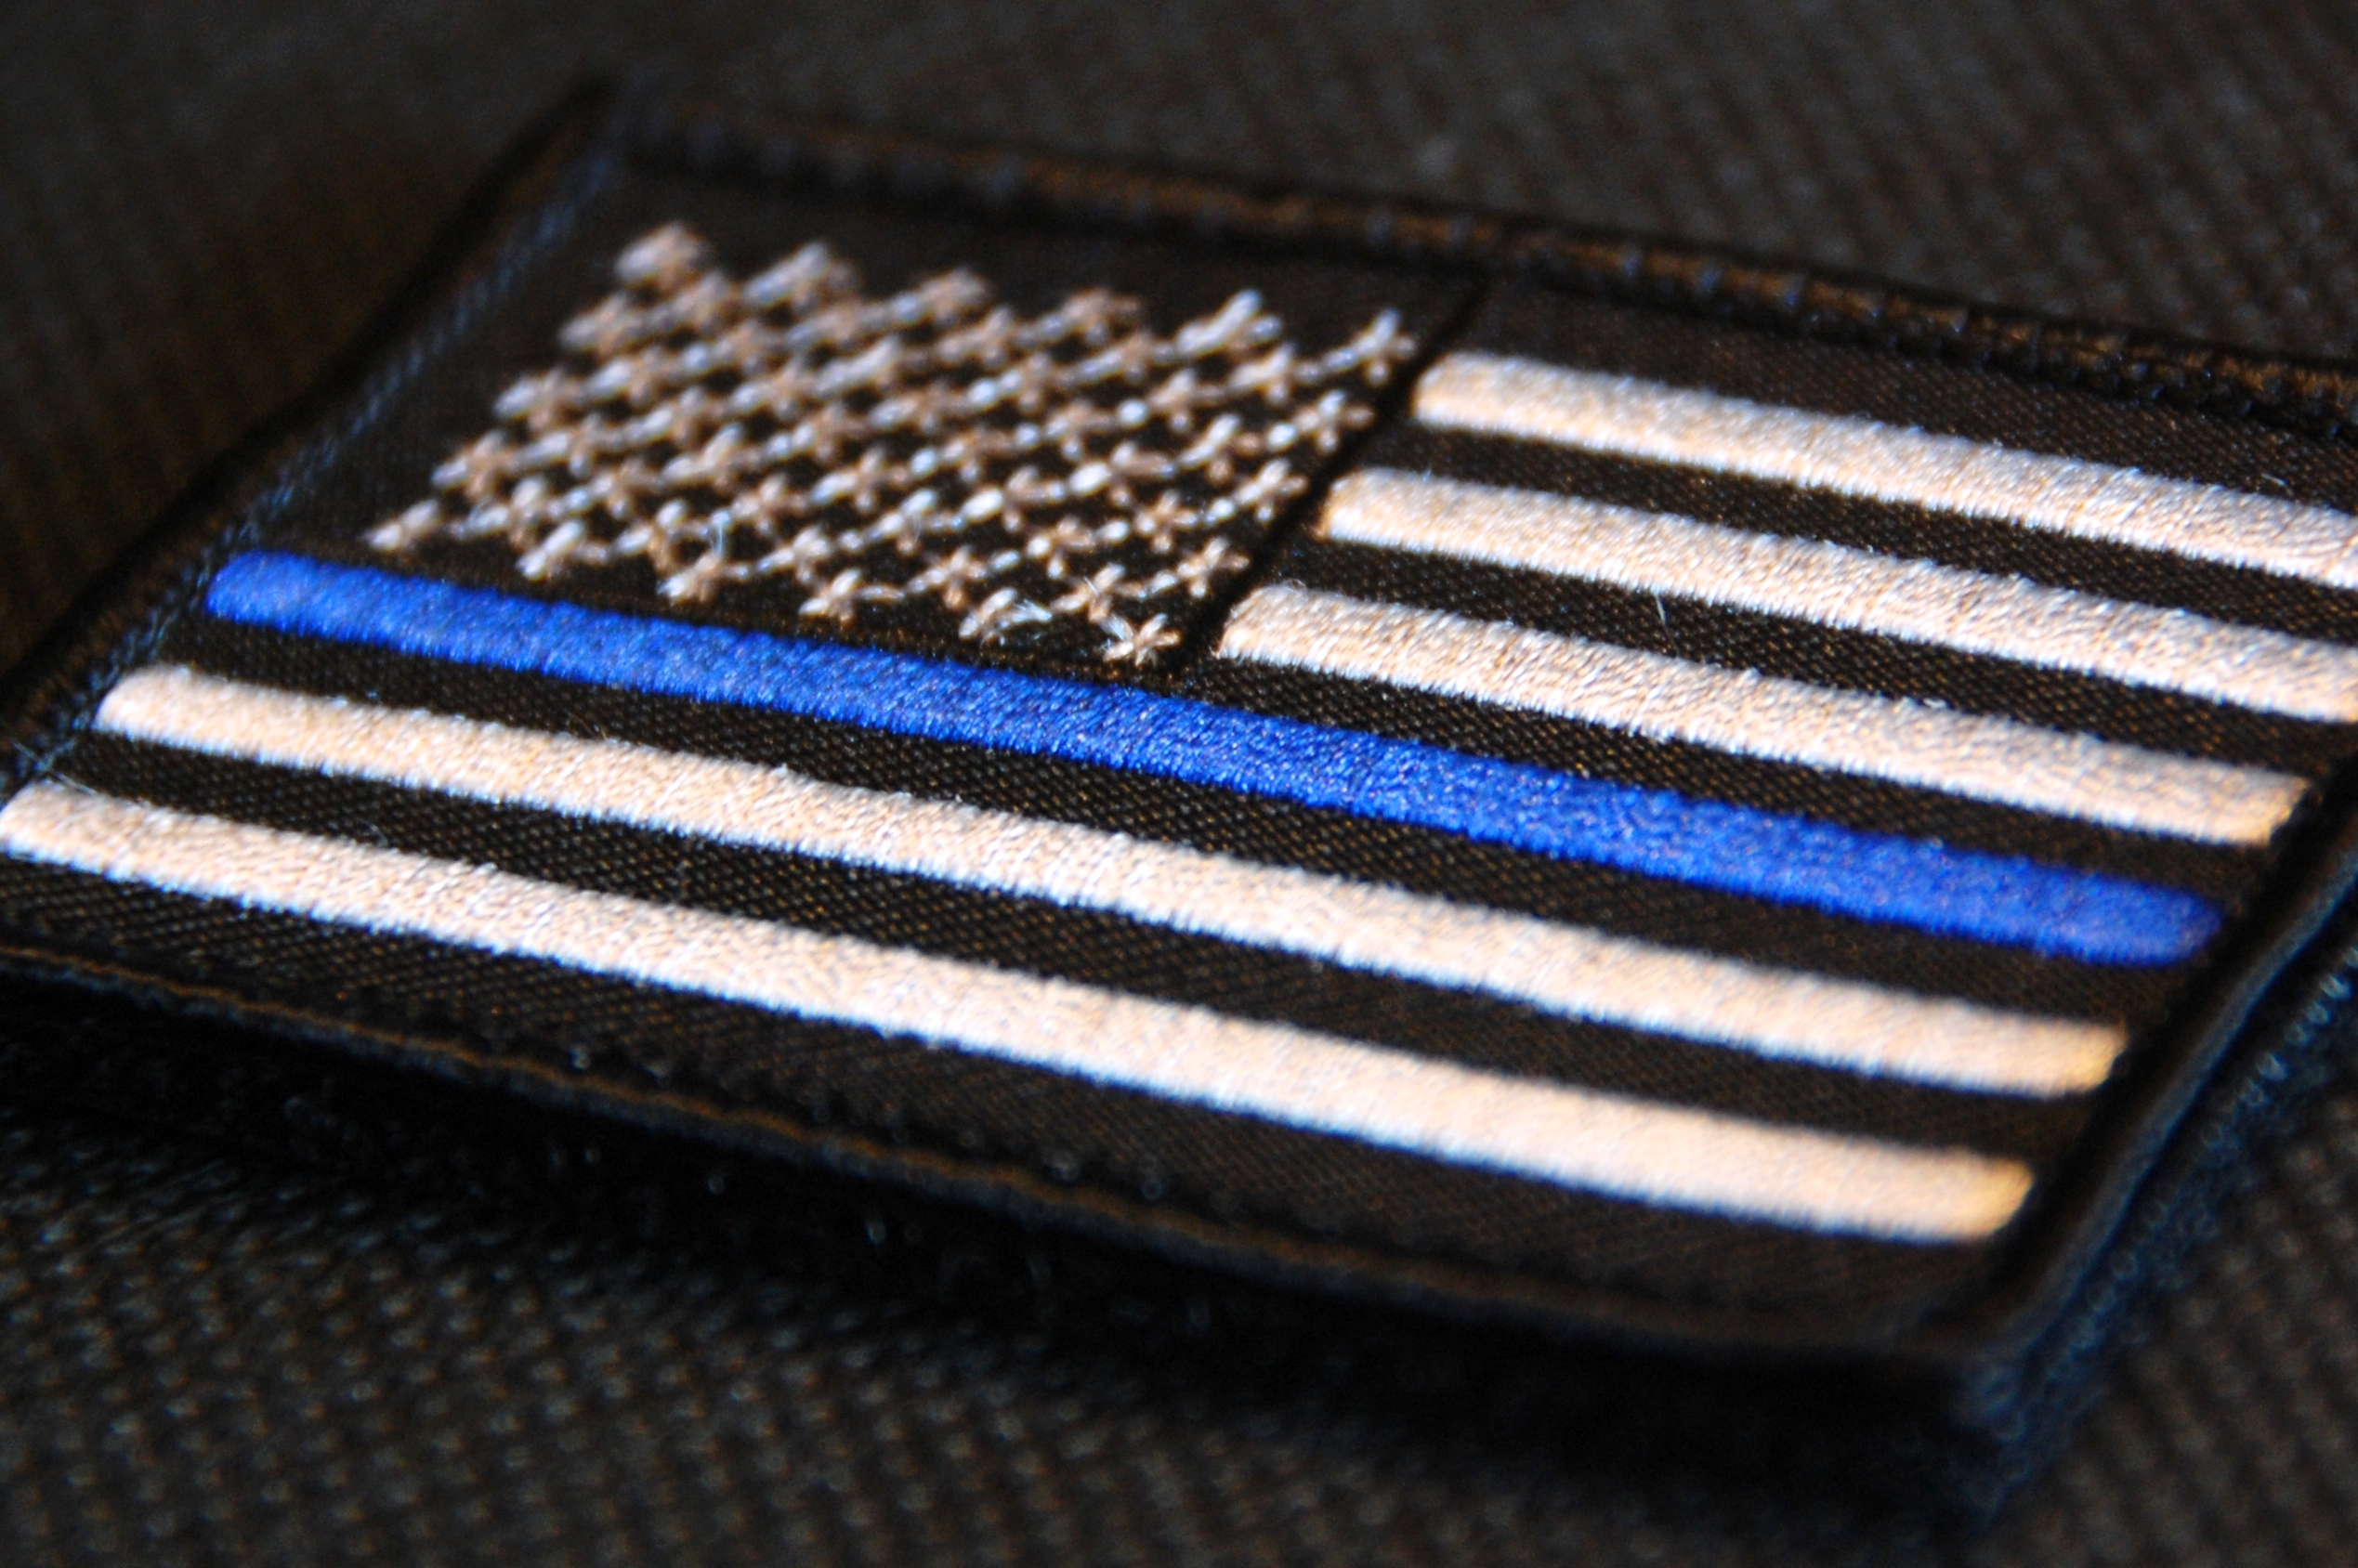 Displaying Image For Thin Blue Line Flag